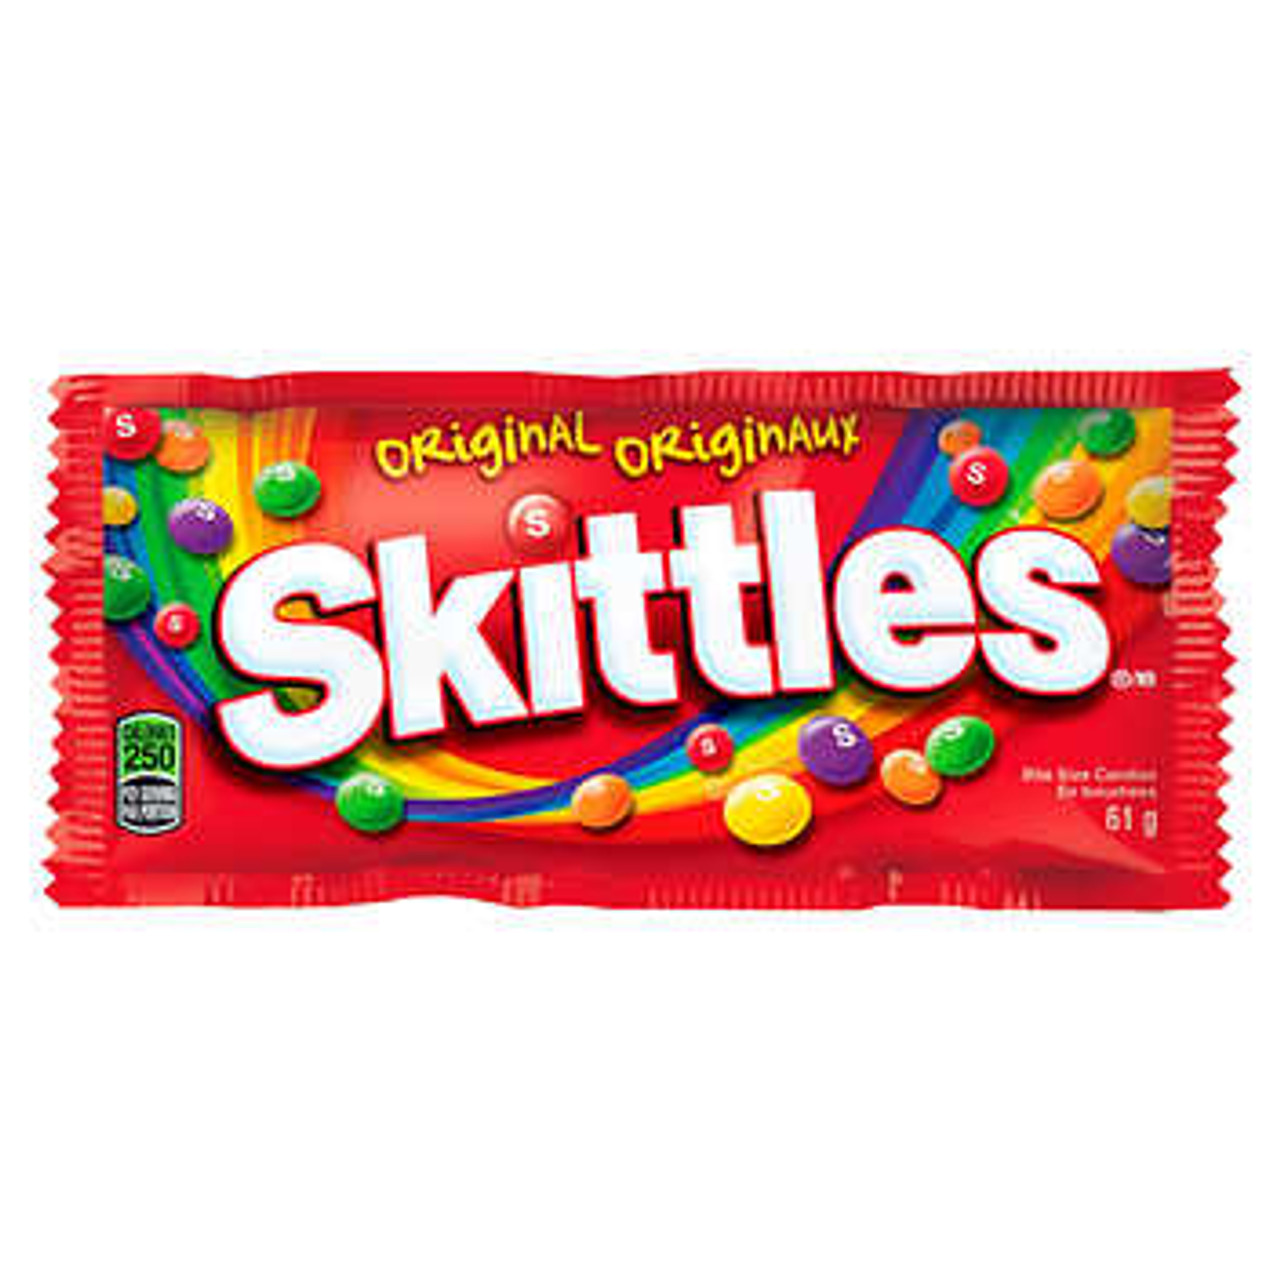 Skittles Original Candy 36-Count - Taste the Rainbow of Fruit Flavors in Every Bite!- Chicken Pieces